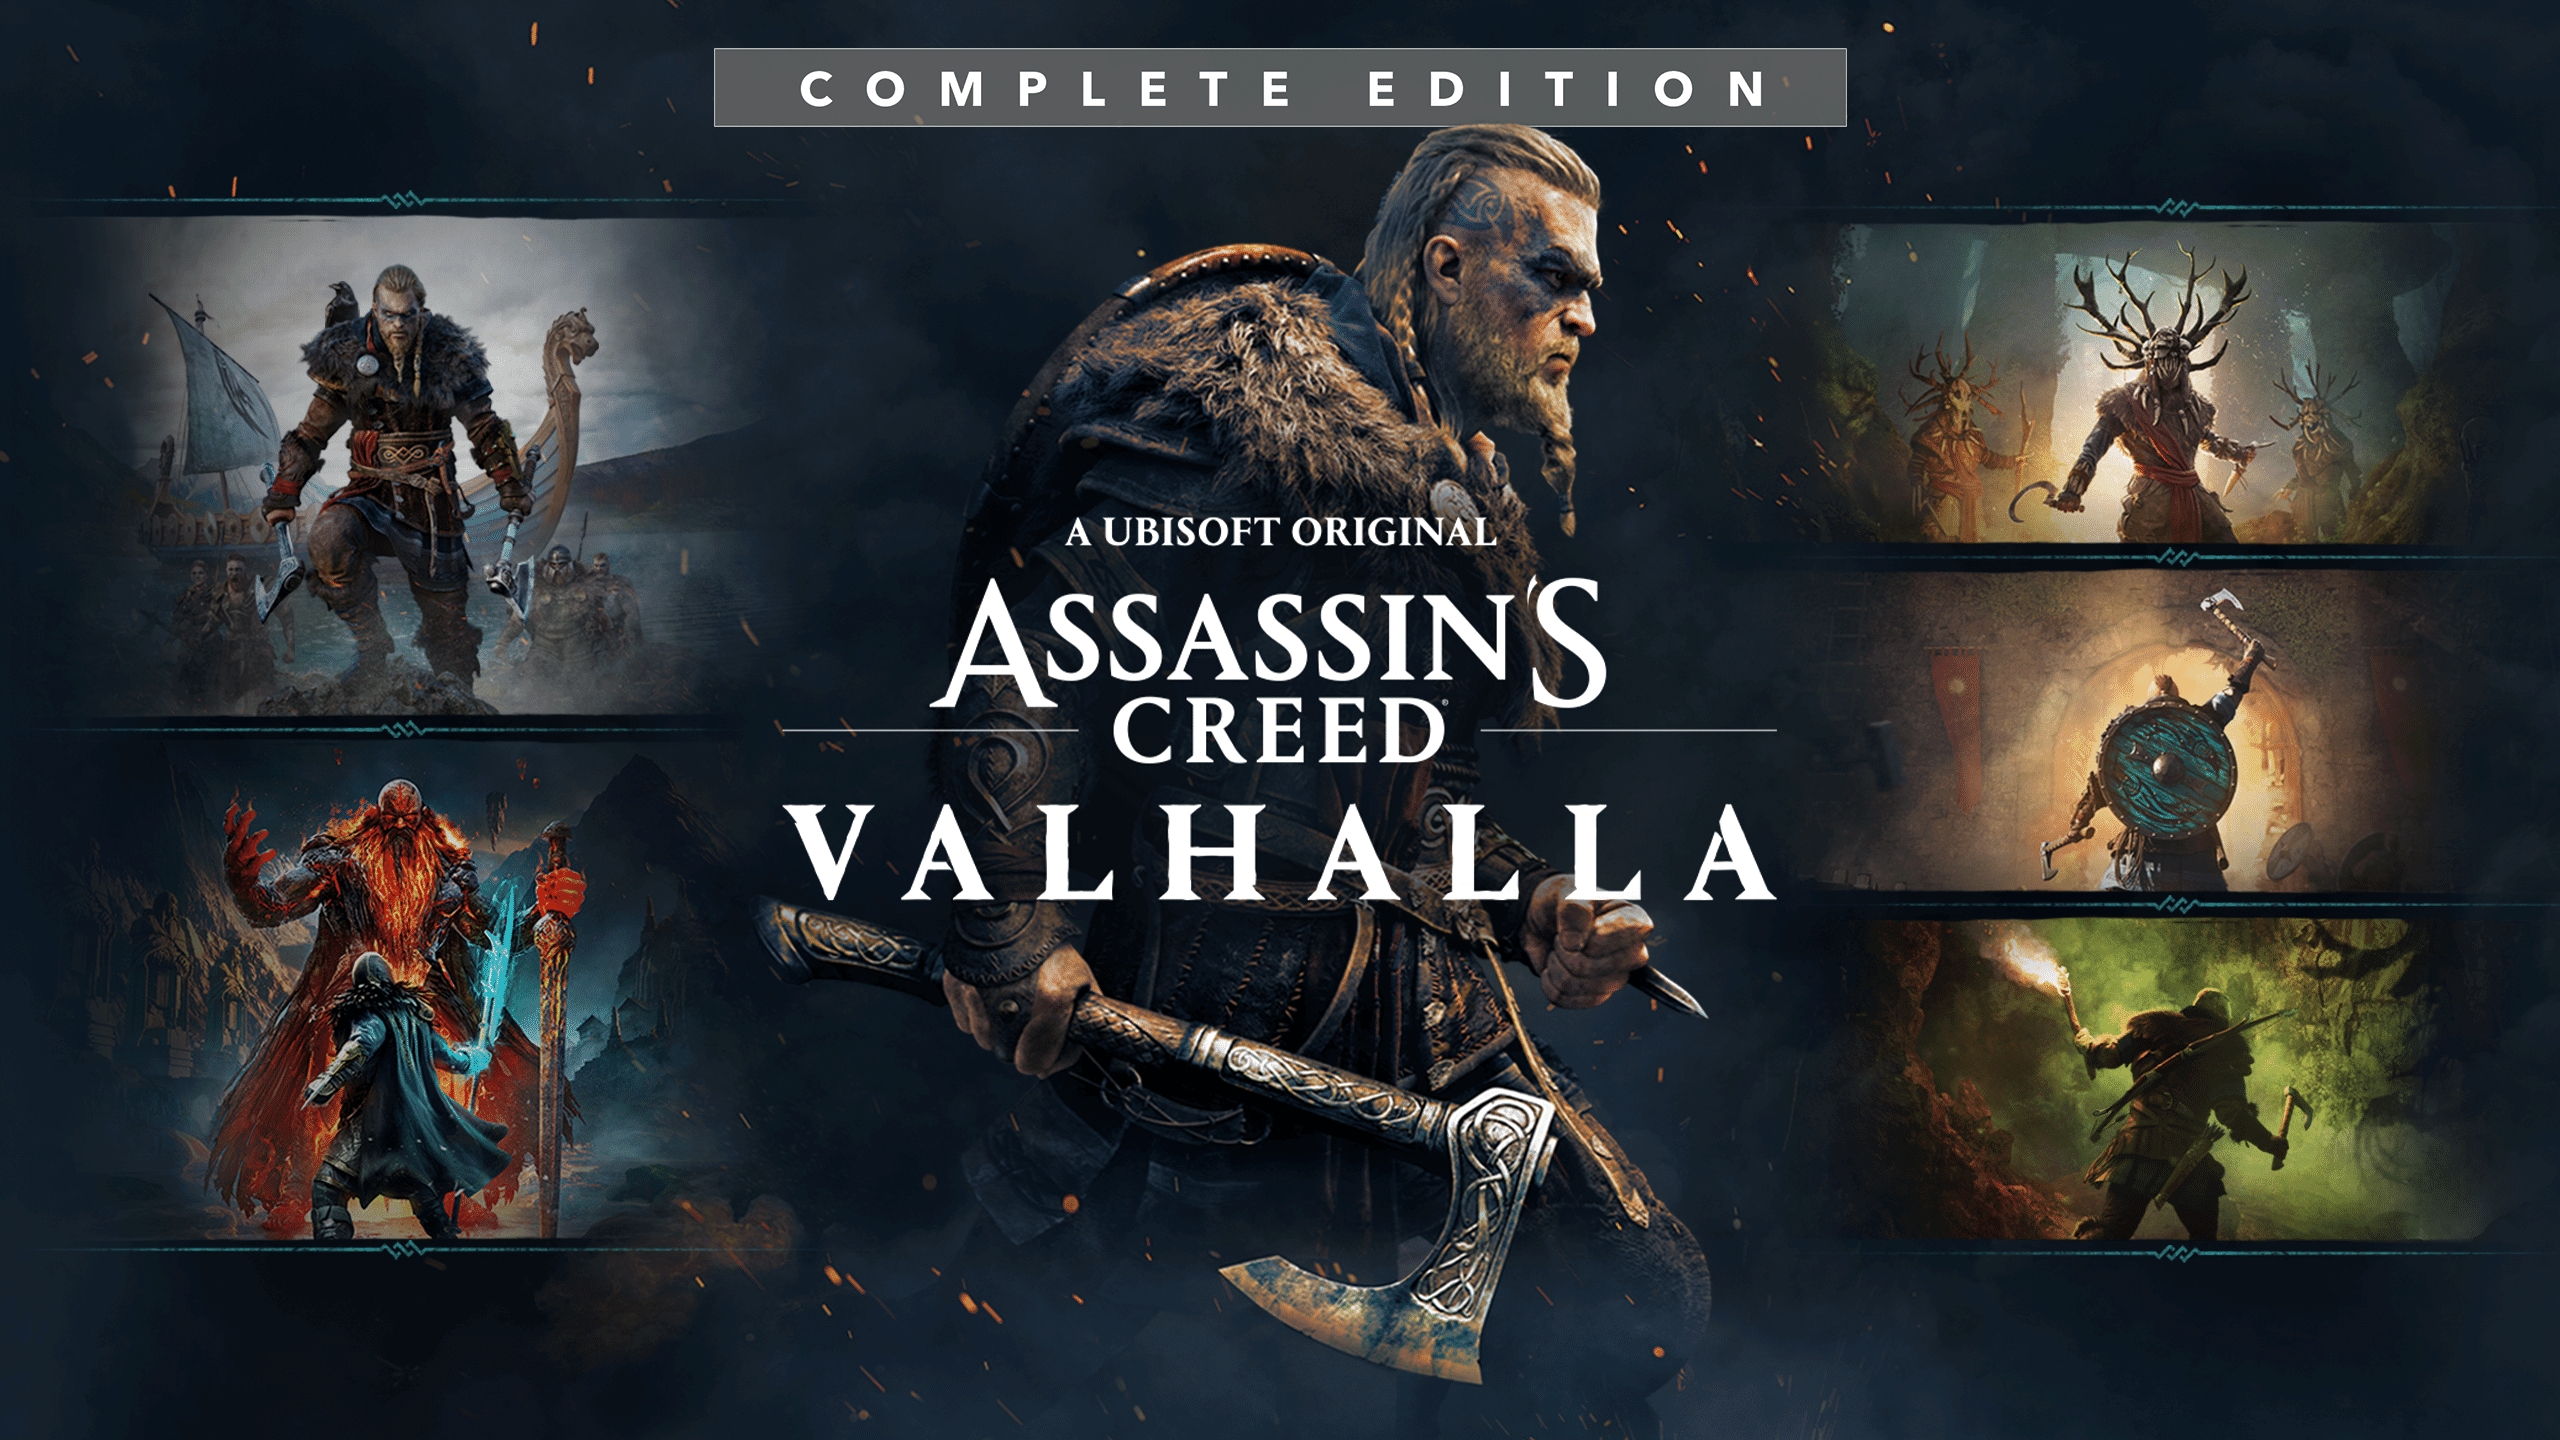 Assassins' Creed Valhalla Review: An Epic Viking Tale That Lacks